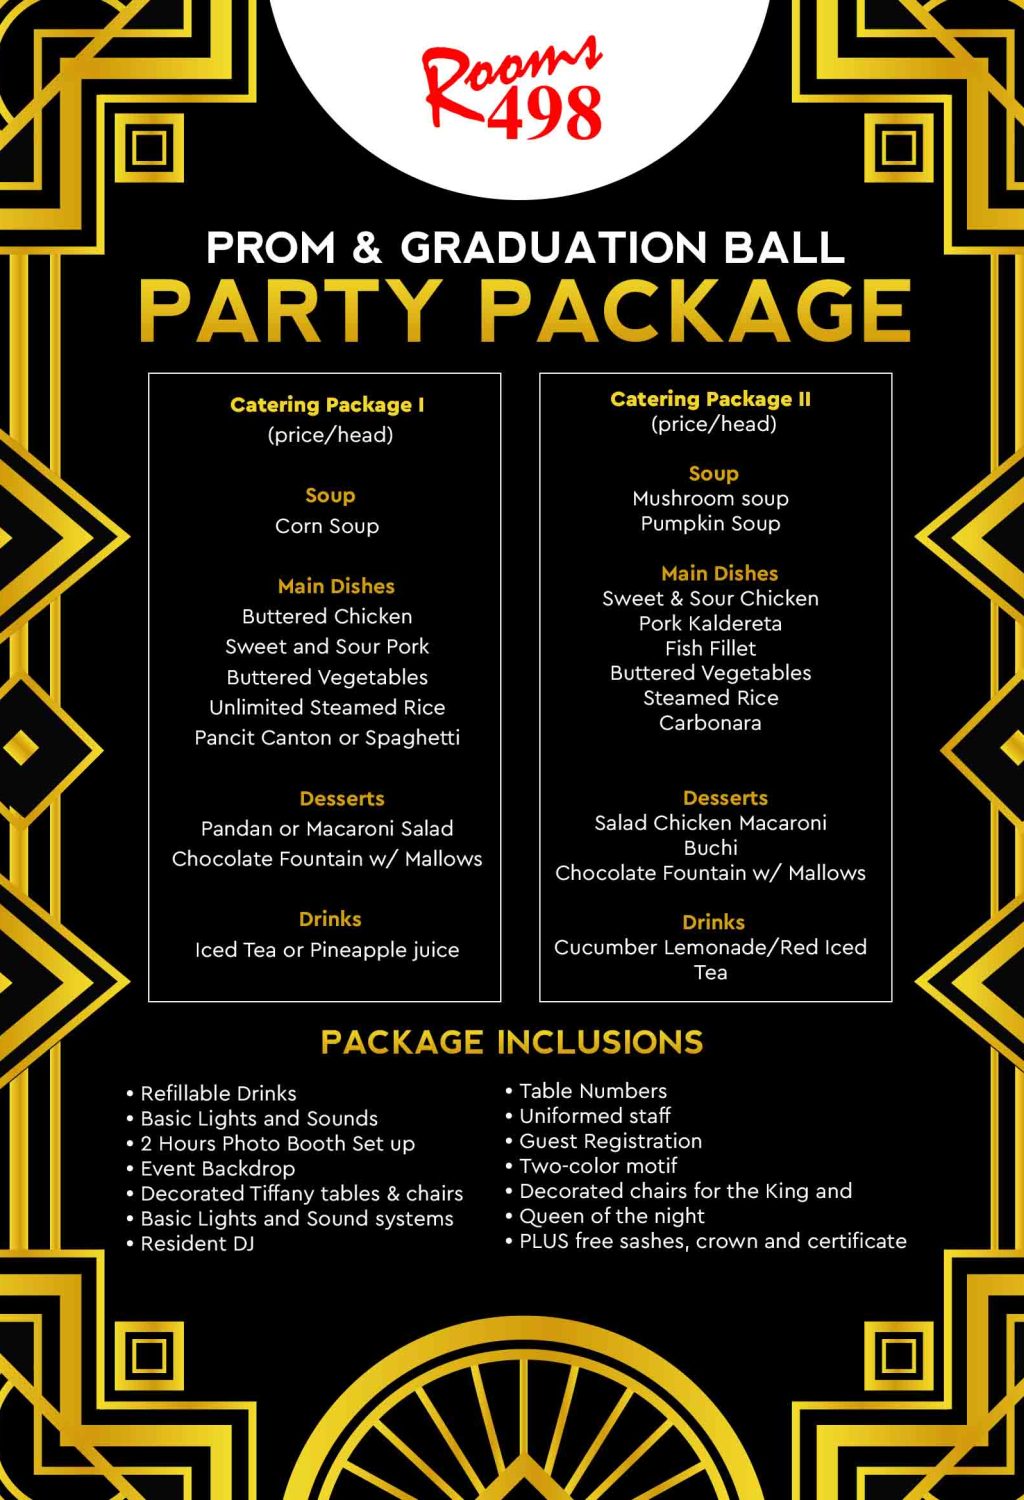 Prom and GradBall Party Packages rooms498.com